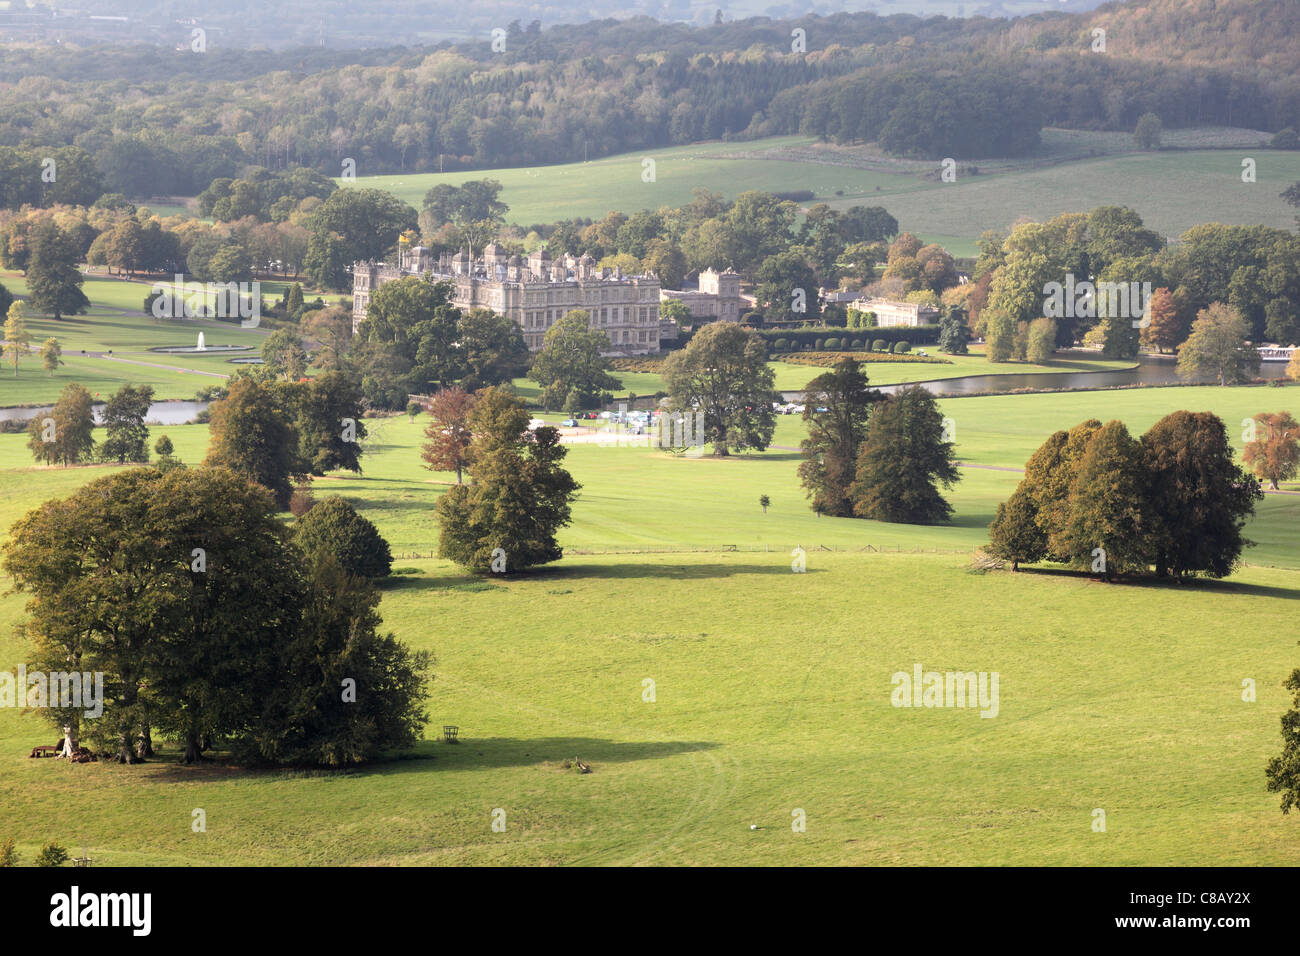 View from Heavens Gate towards Longleat House, Warminster, Wiltshire, England, UK Stock Photo